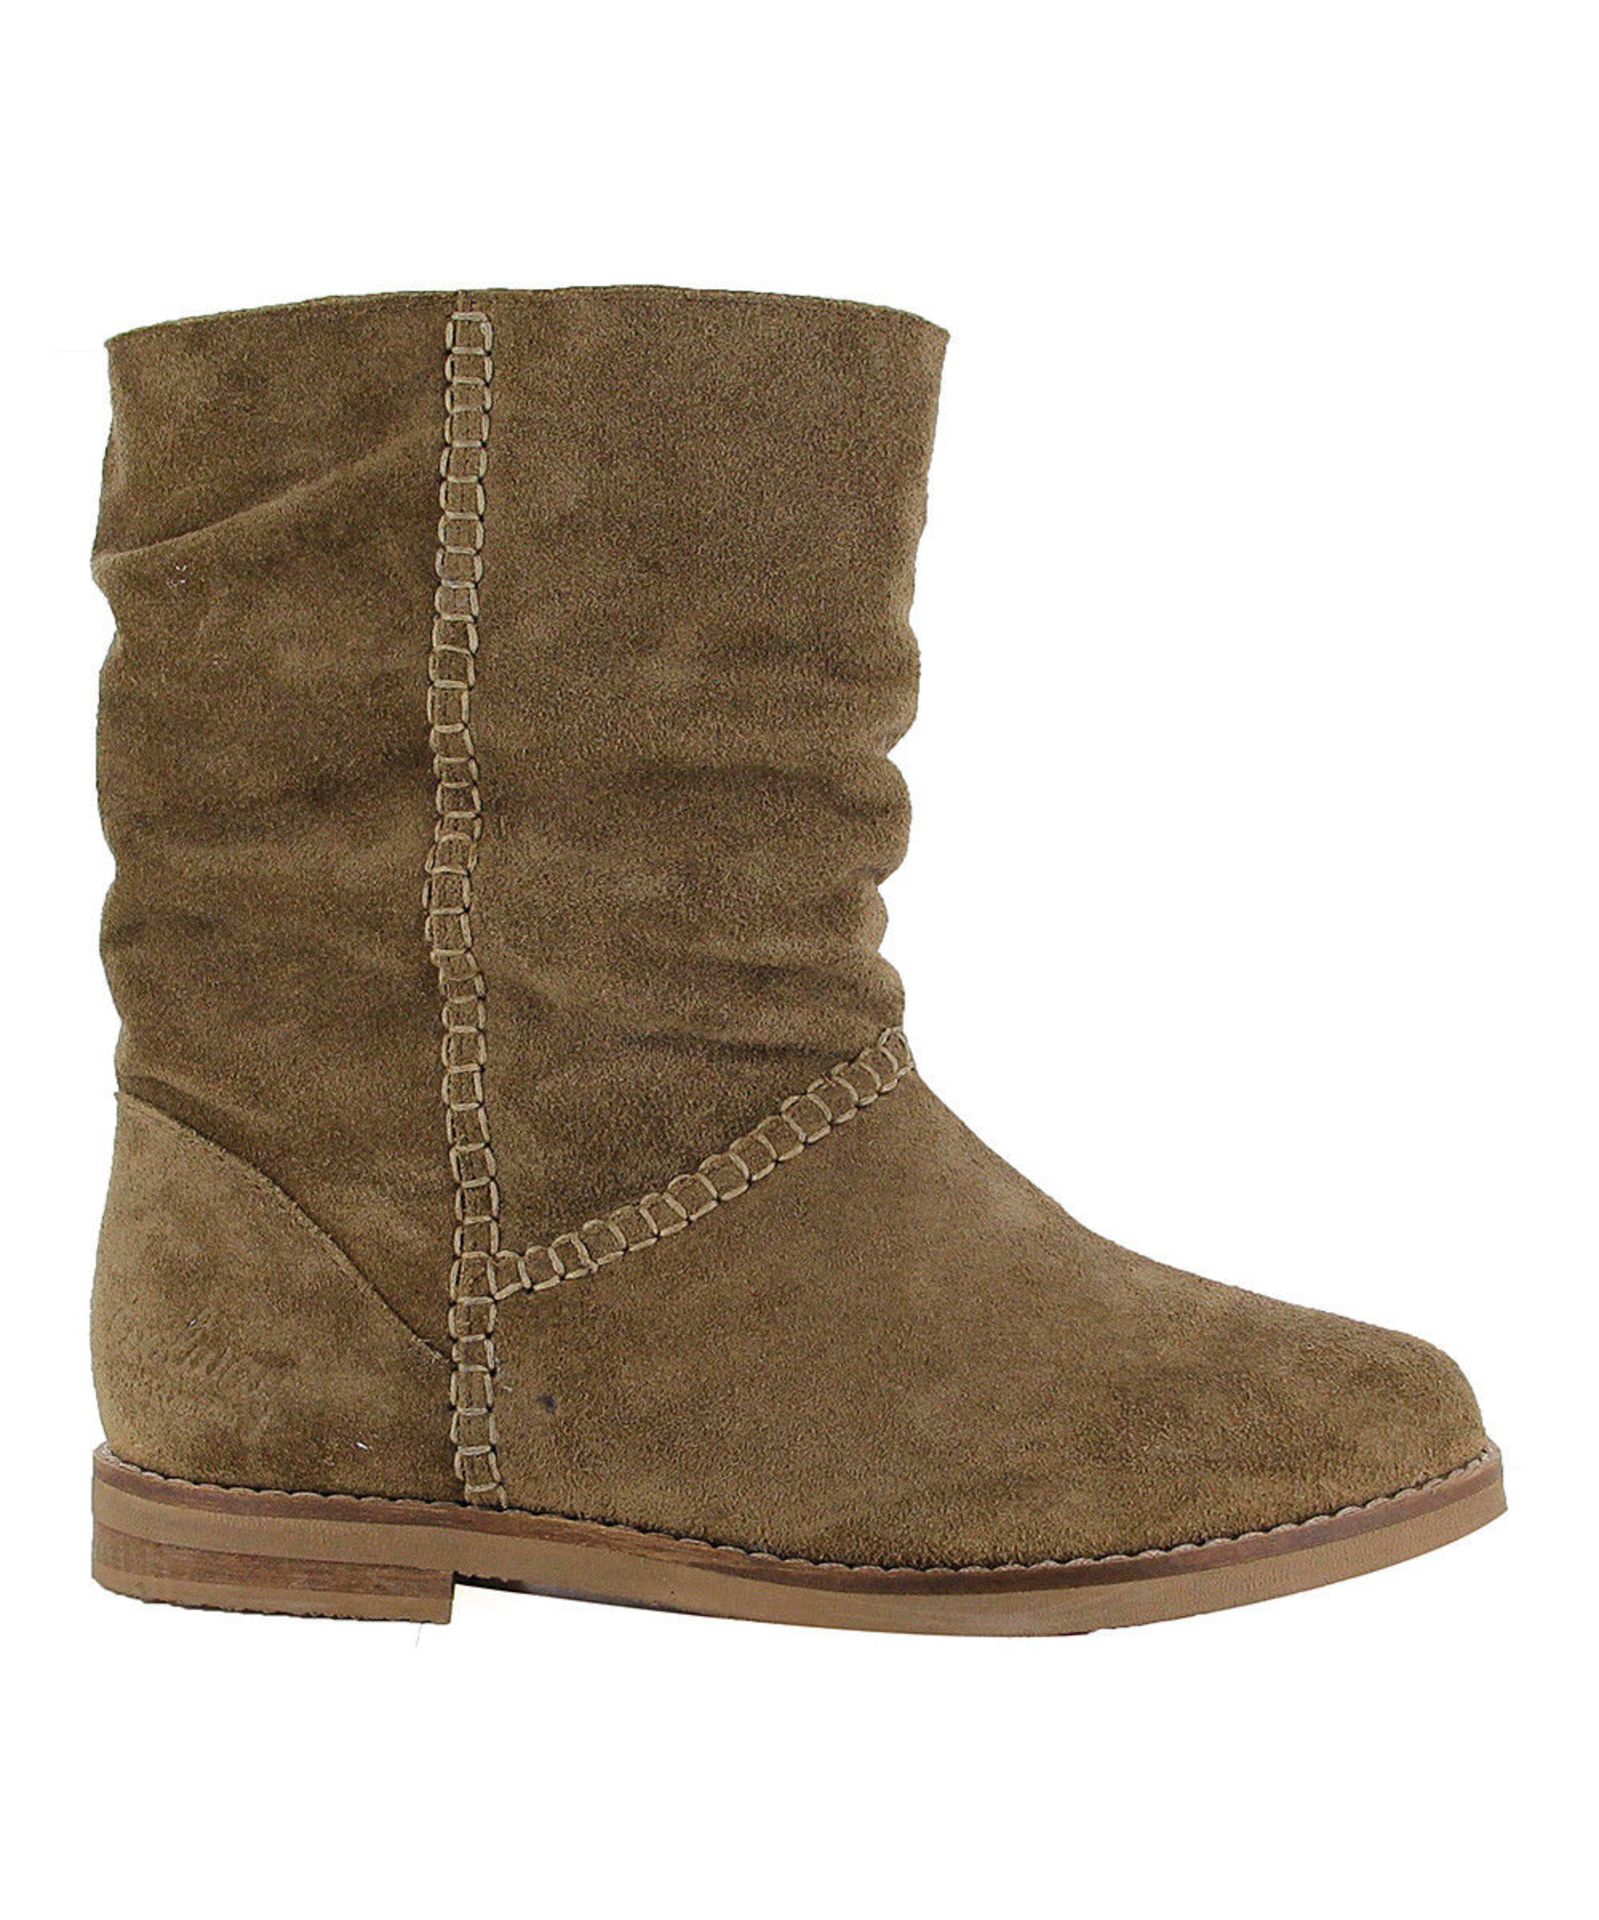 Coolway Taupe Azalea Suede Boot (Uk Size 7:Us Size 9/9.5) (New with box) [Ref: 34180997-H-003]